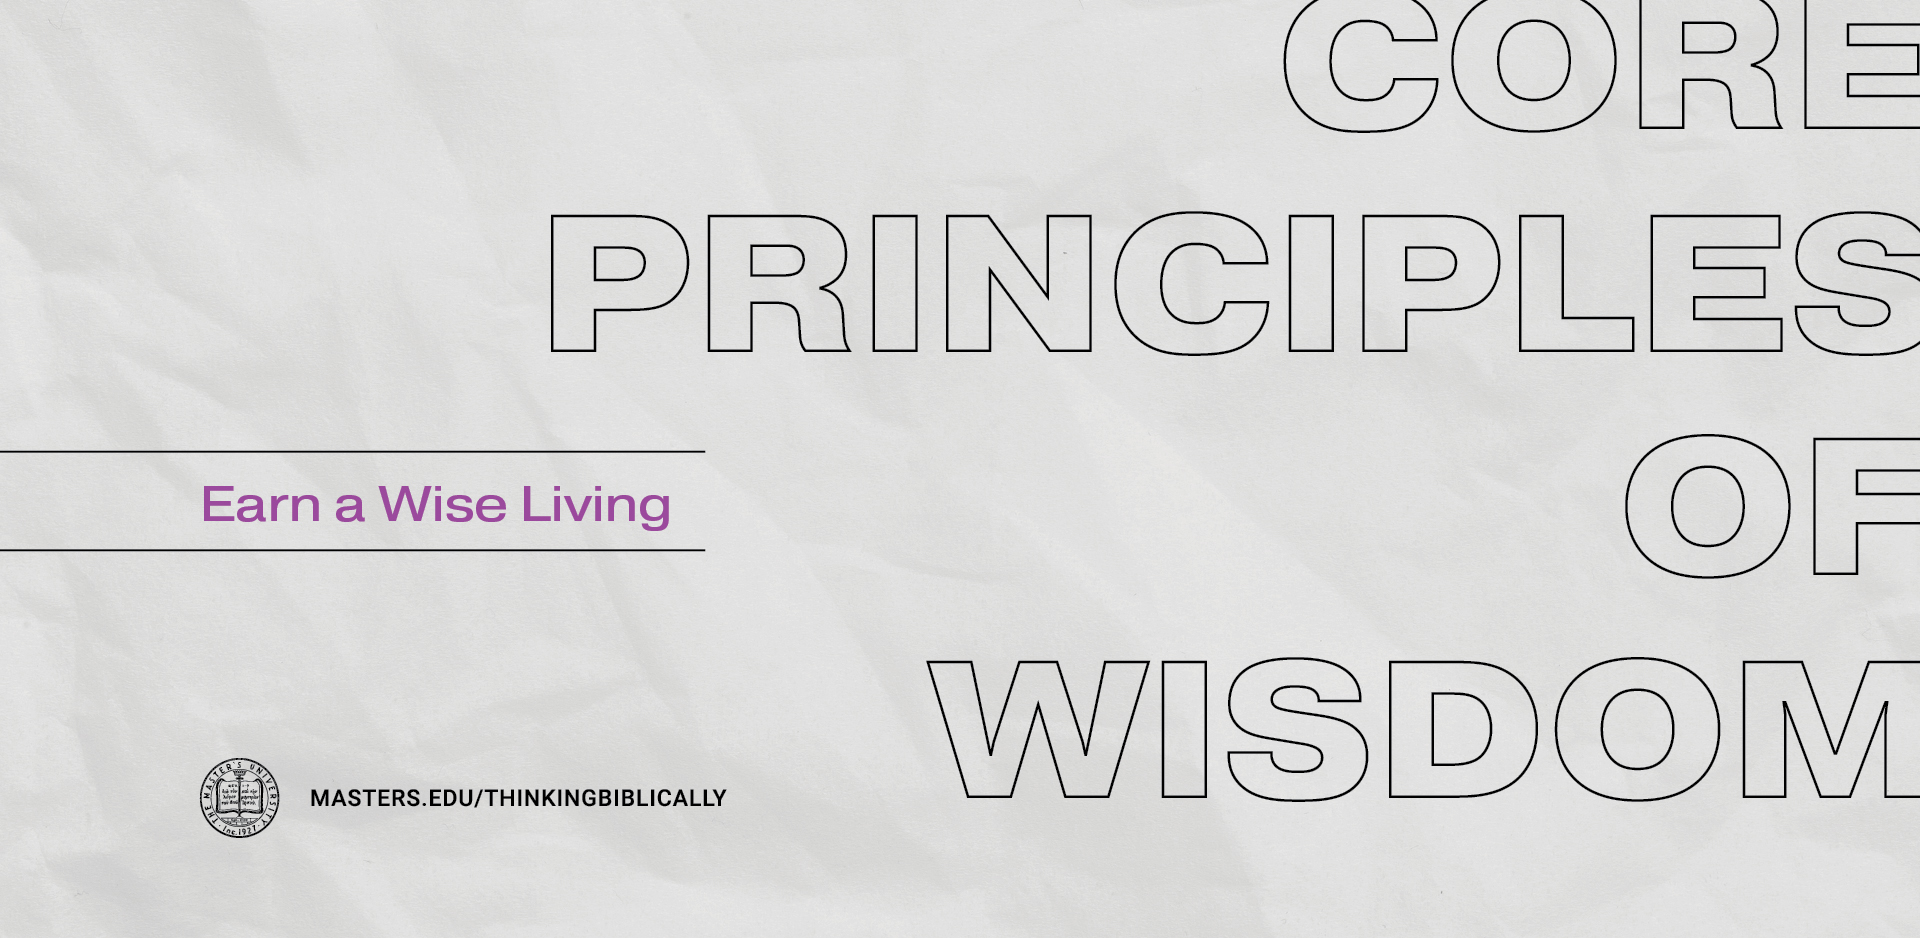 Earn a Wise Living Featured Image